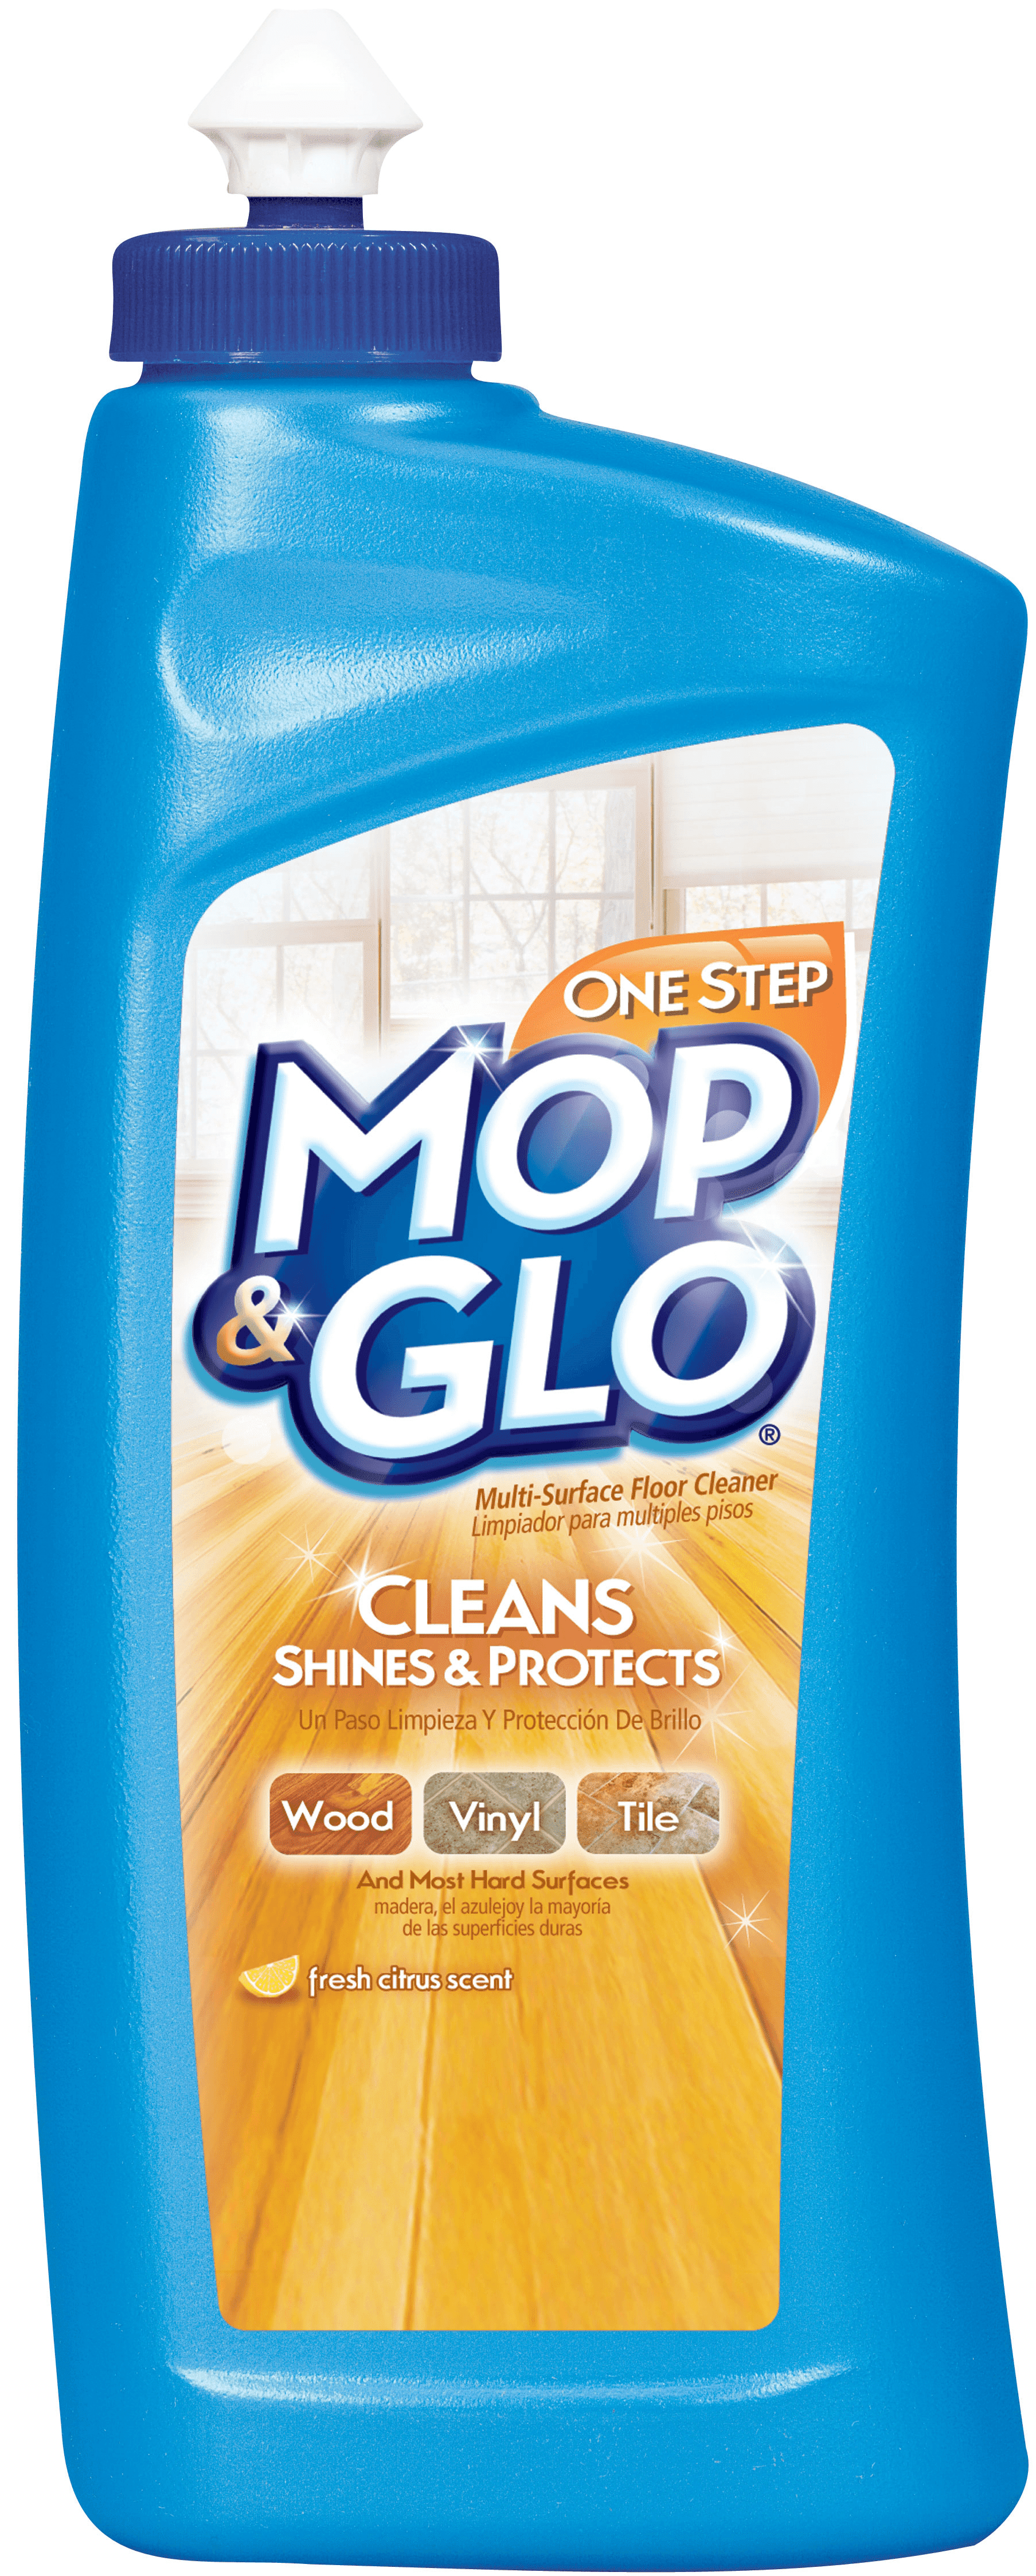 Mop Glo Multi Surface Floor Cleaner, Can Mop And Glo Be Used On Laminate Floors